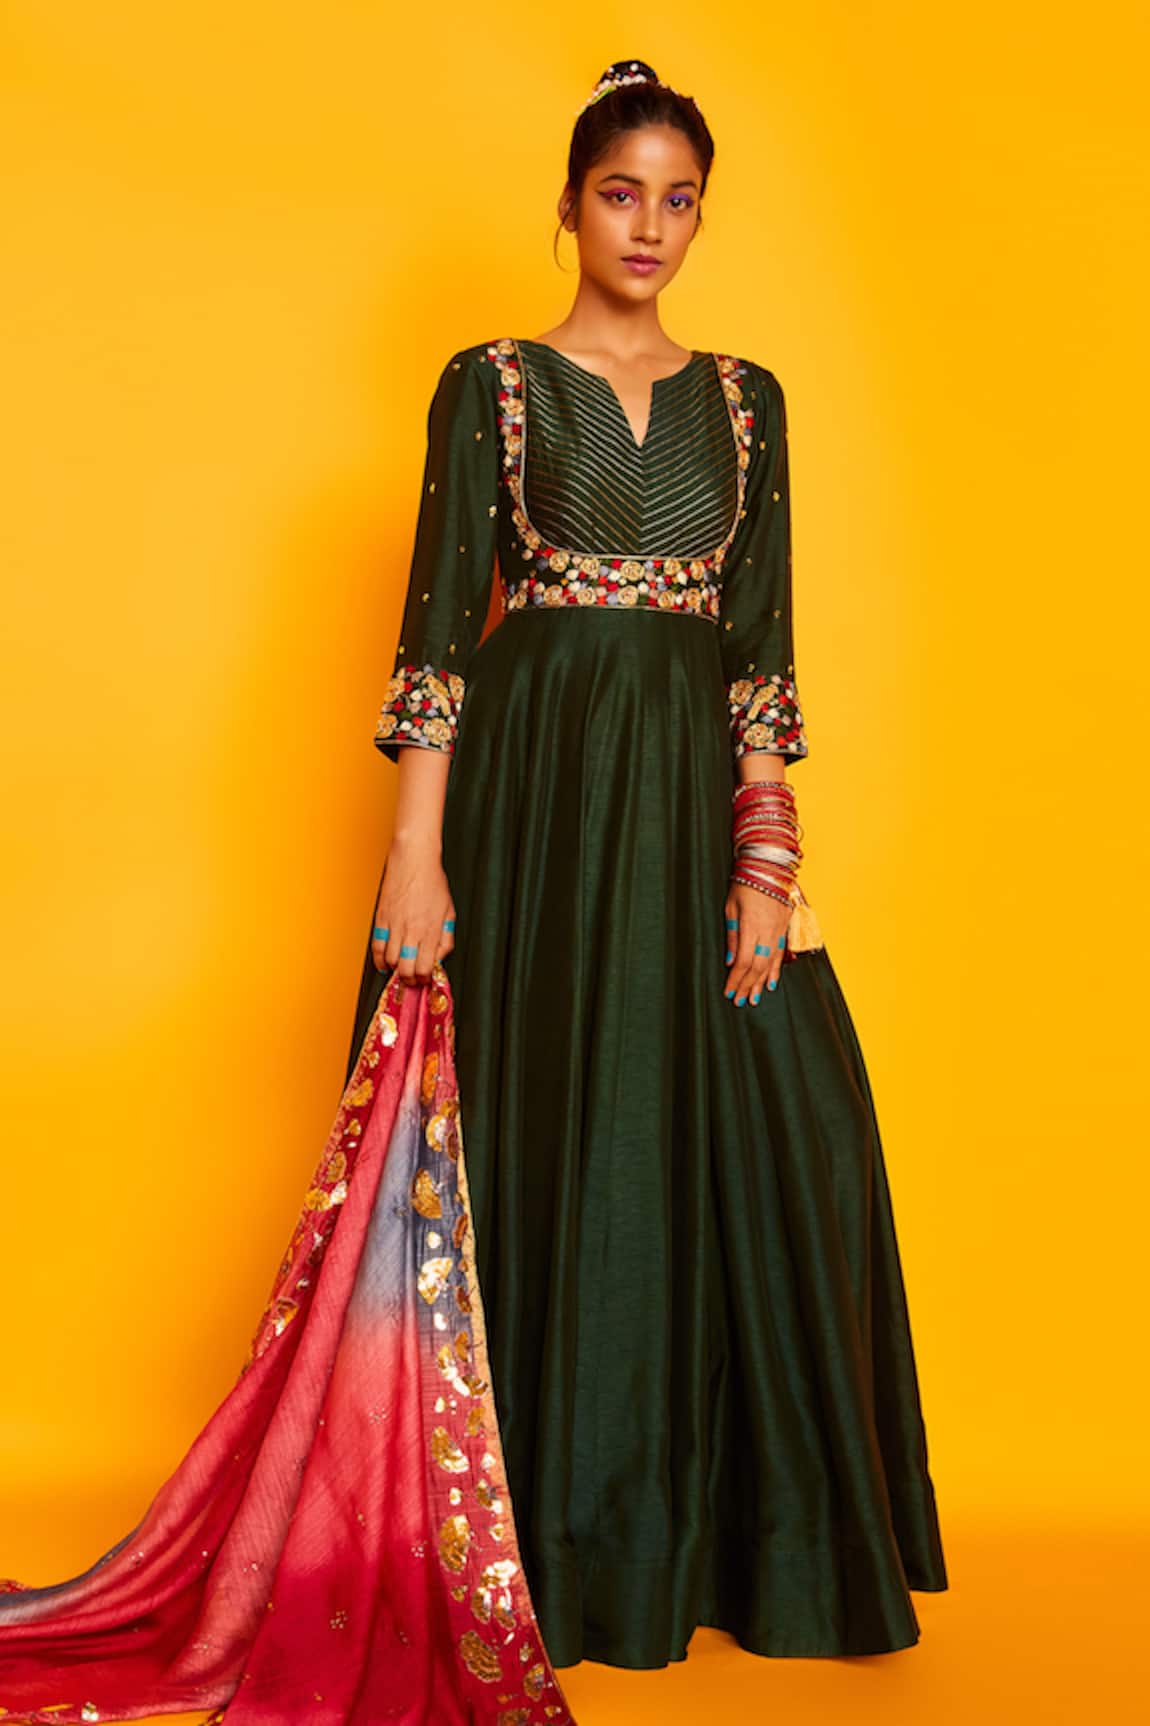 Explore from a wide collection of Gown Design Online – subhvastra